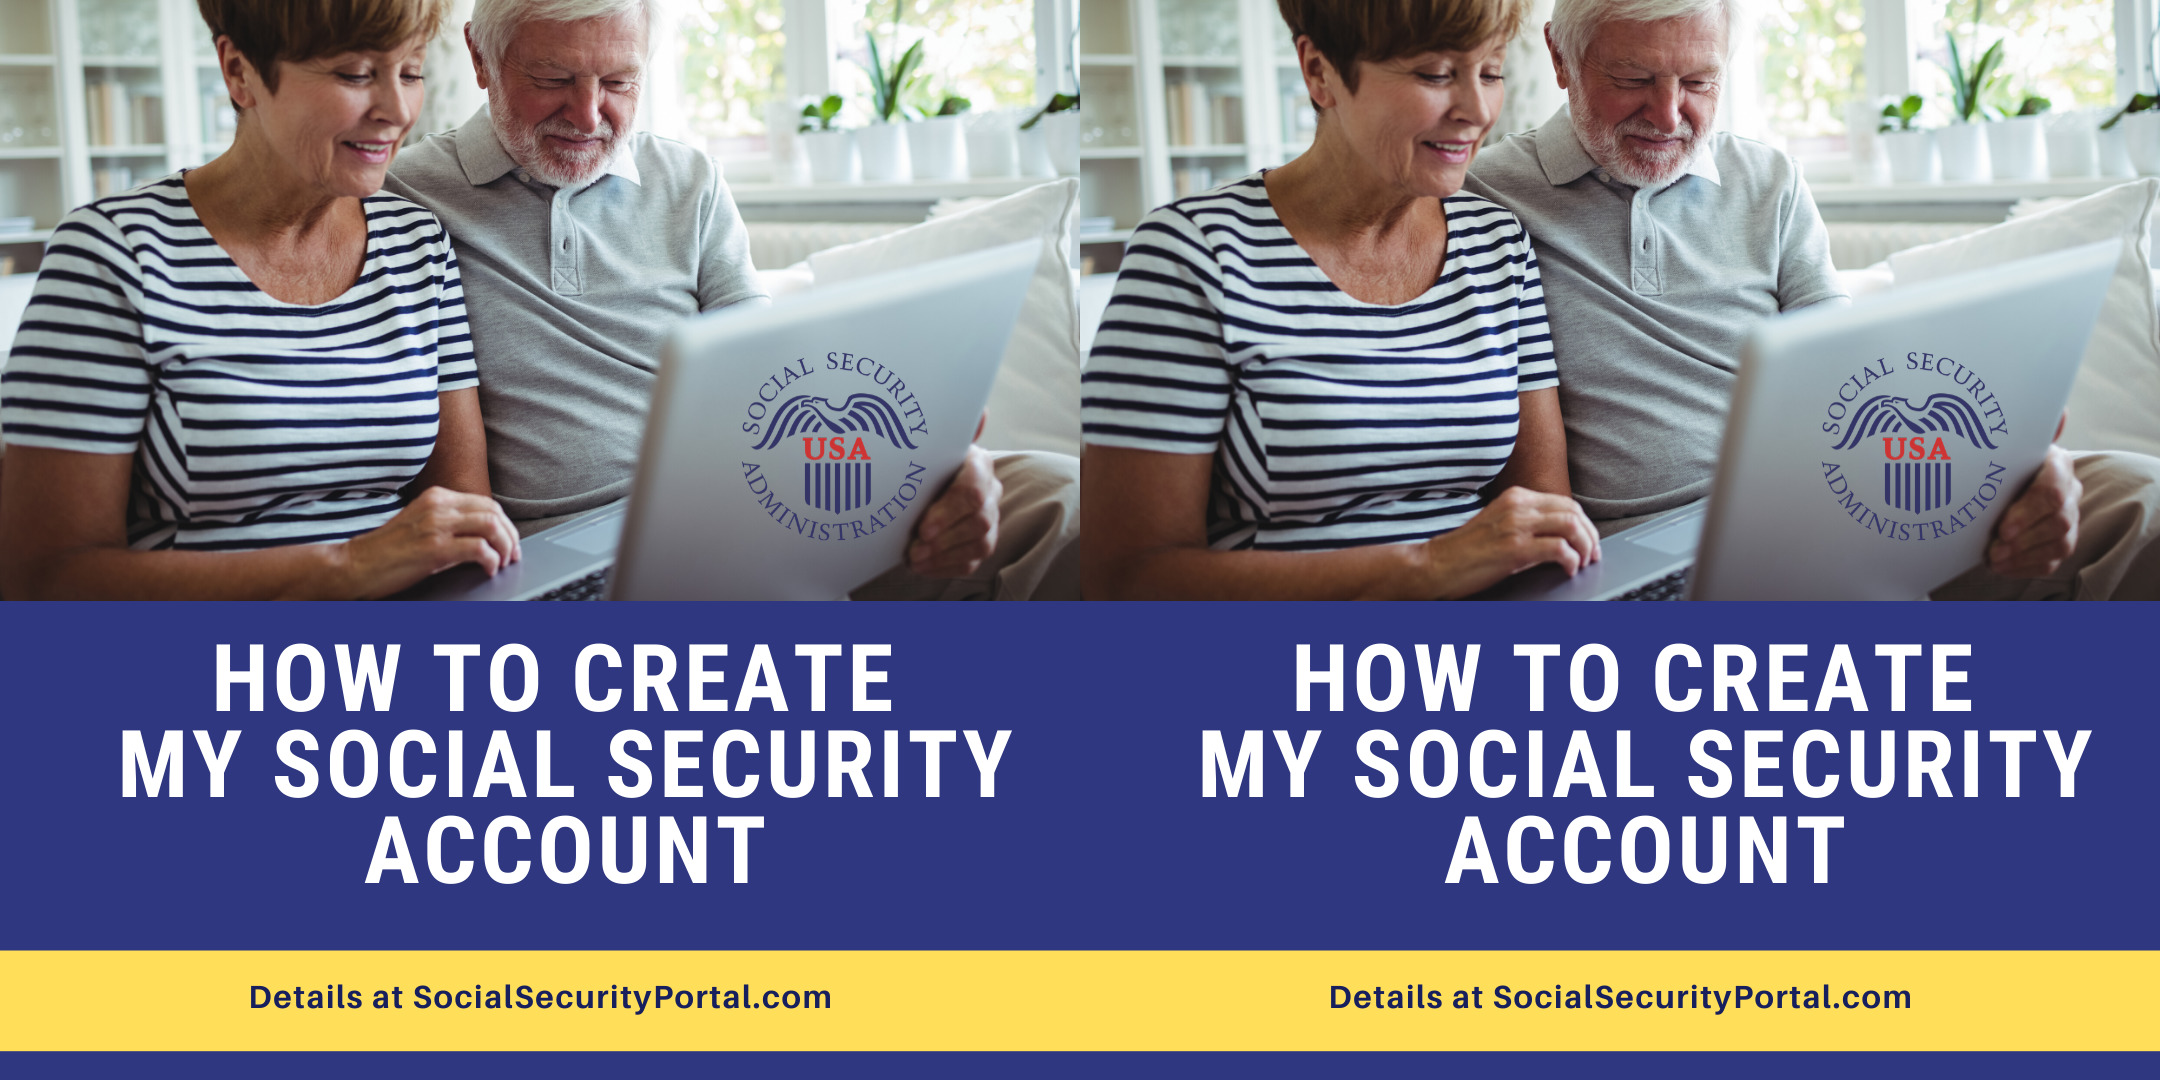 How To Create Your Own 'My Social Security' Account Online